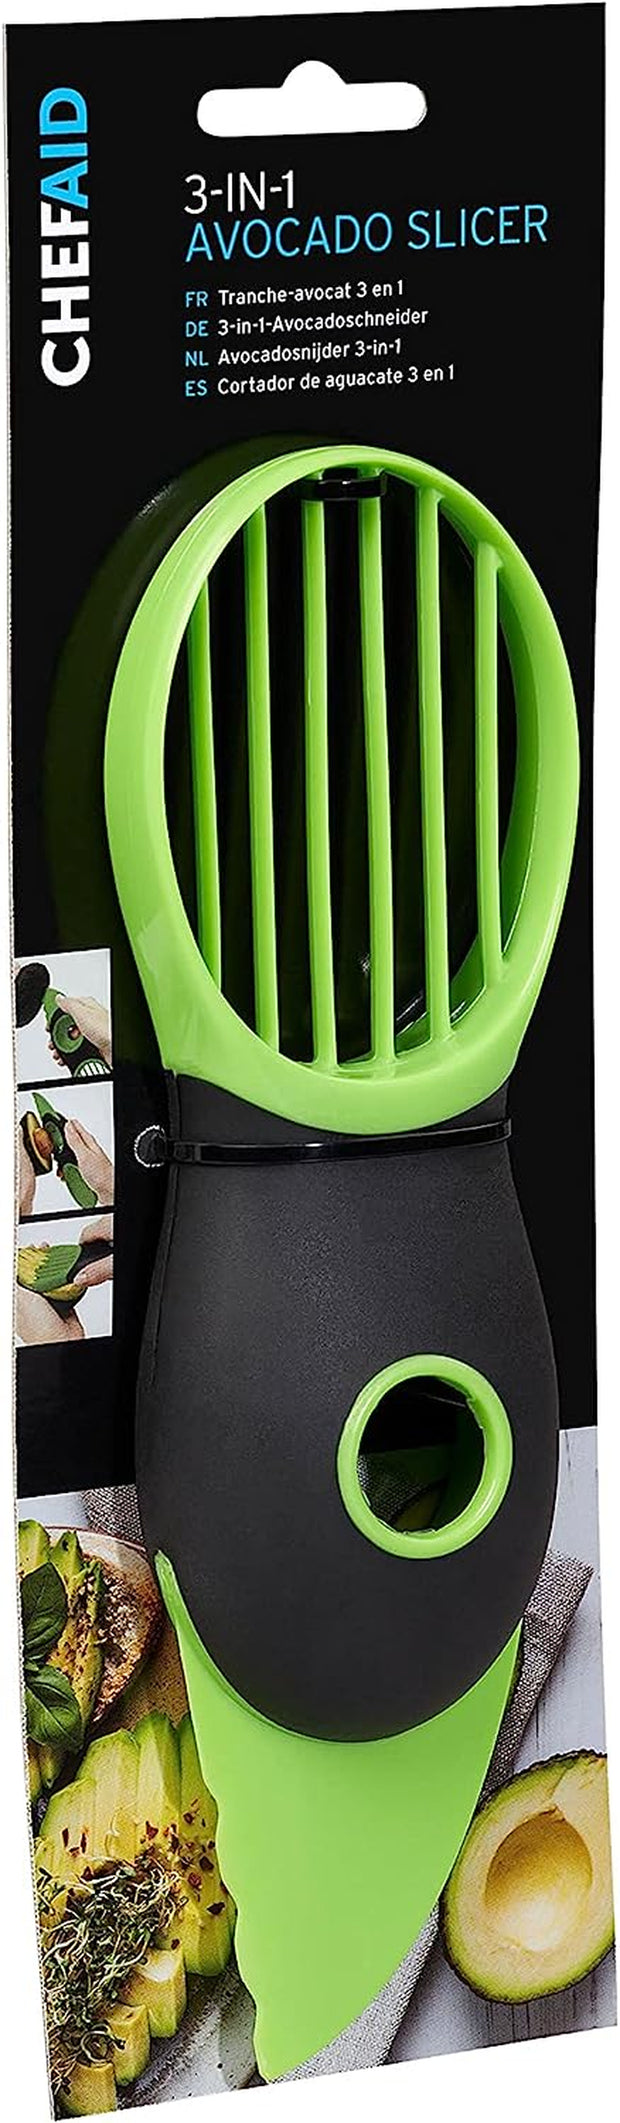 3 in 1 Avocado Tool, Essential Gadget for Cutting, De-Stoning and Slicing, Perfect for Everday Use and Can Prepare Avocados into Many Styles, Can Be Used on Other Soft Fruit and Veg